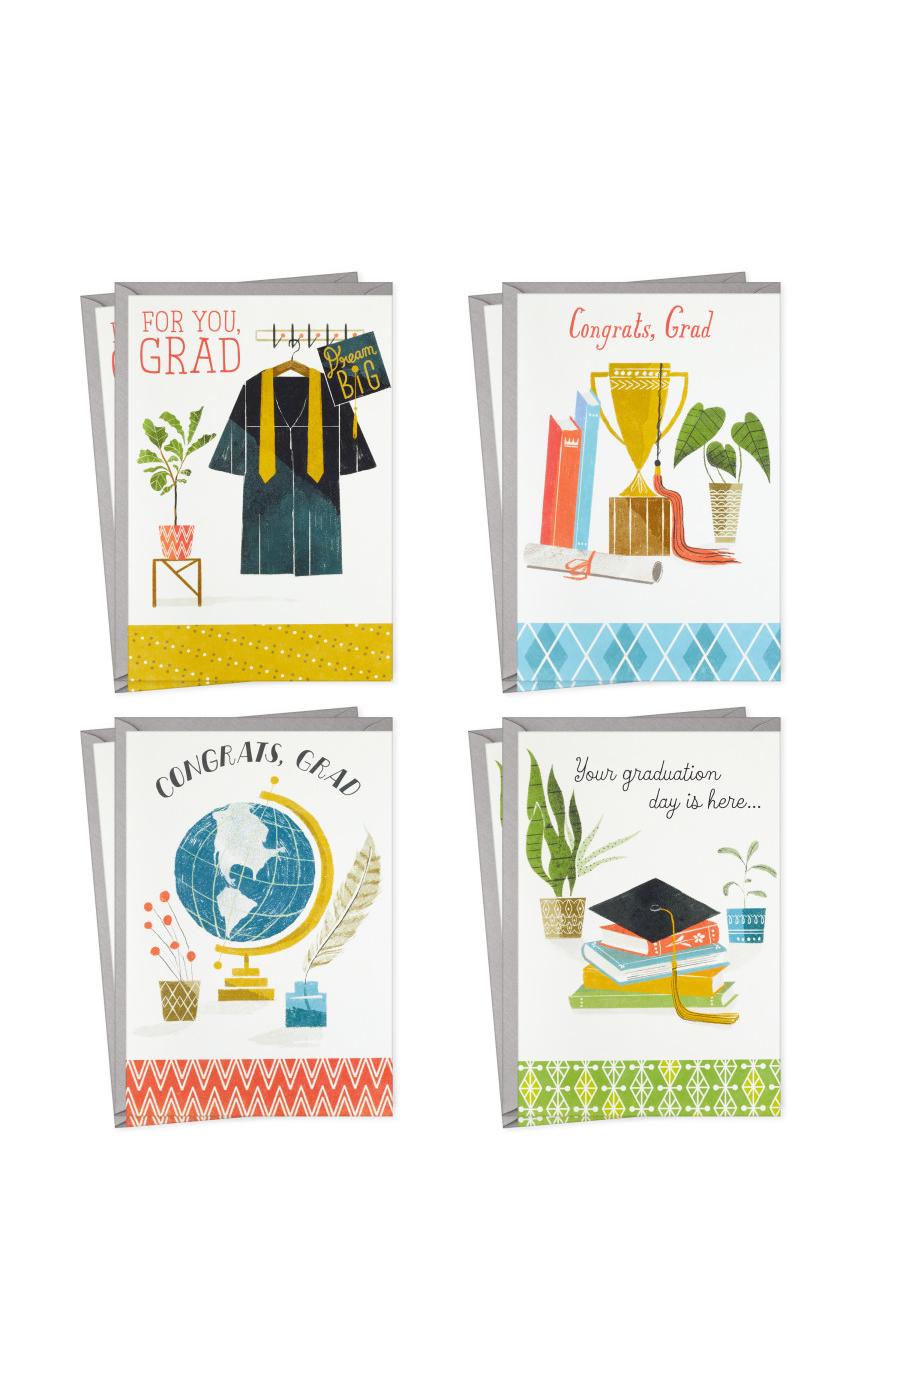 Hallmark Congrats Grad Graduation Assorted Cards with Envelopes - S16, S12; image 1 of 7